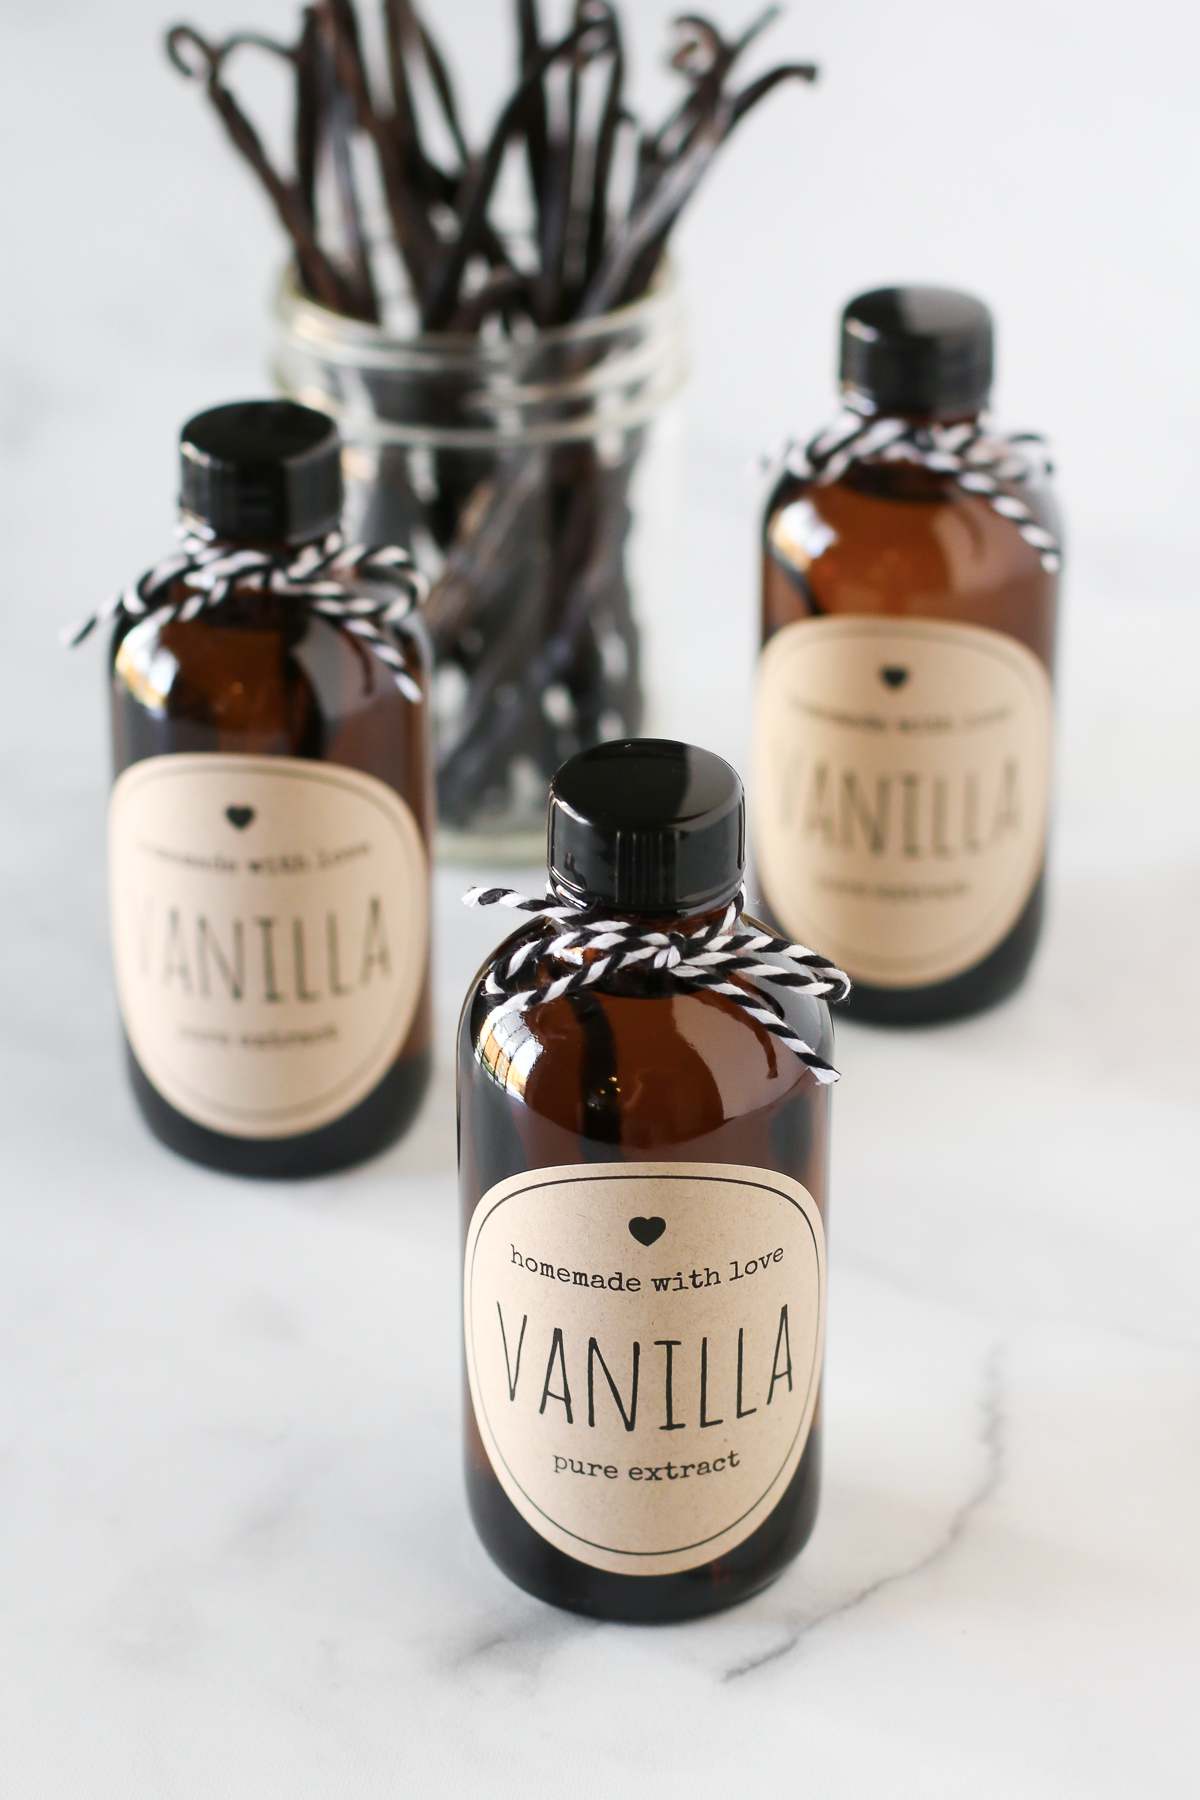 How to Make Homemade Vanilla Extract. Only a few easy steps to make your very own bottles of pure vanilla extract!